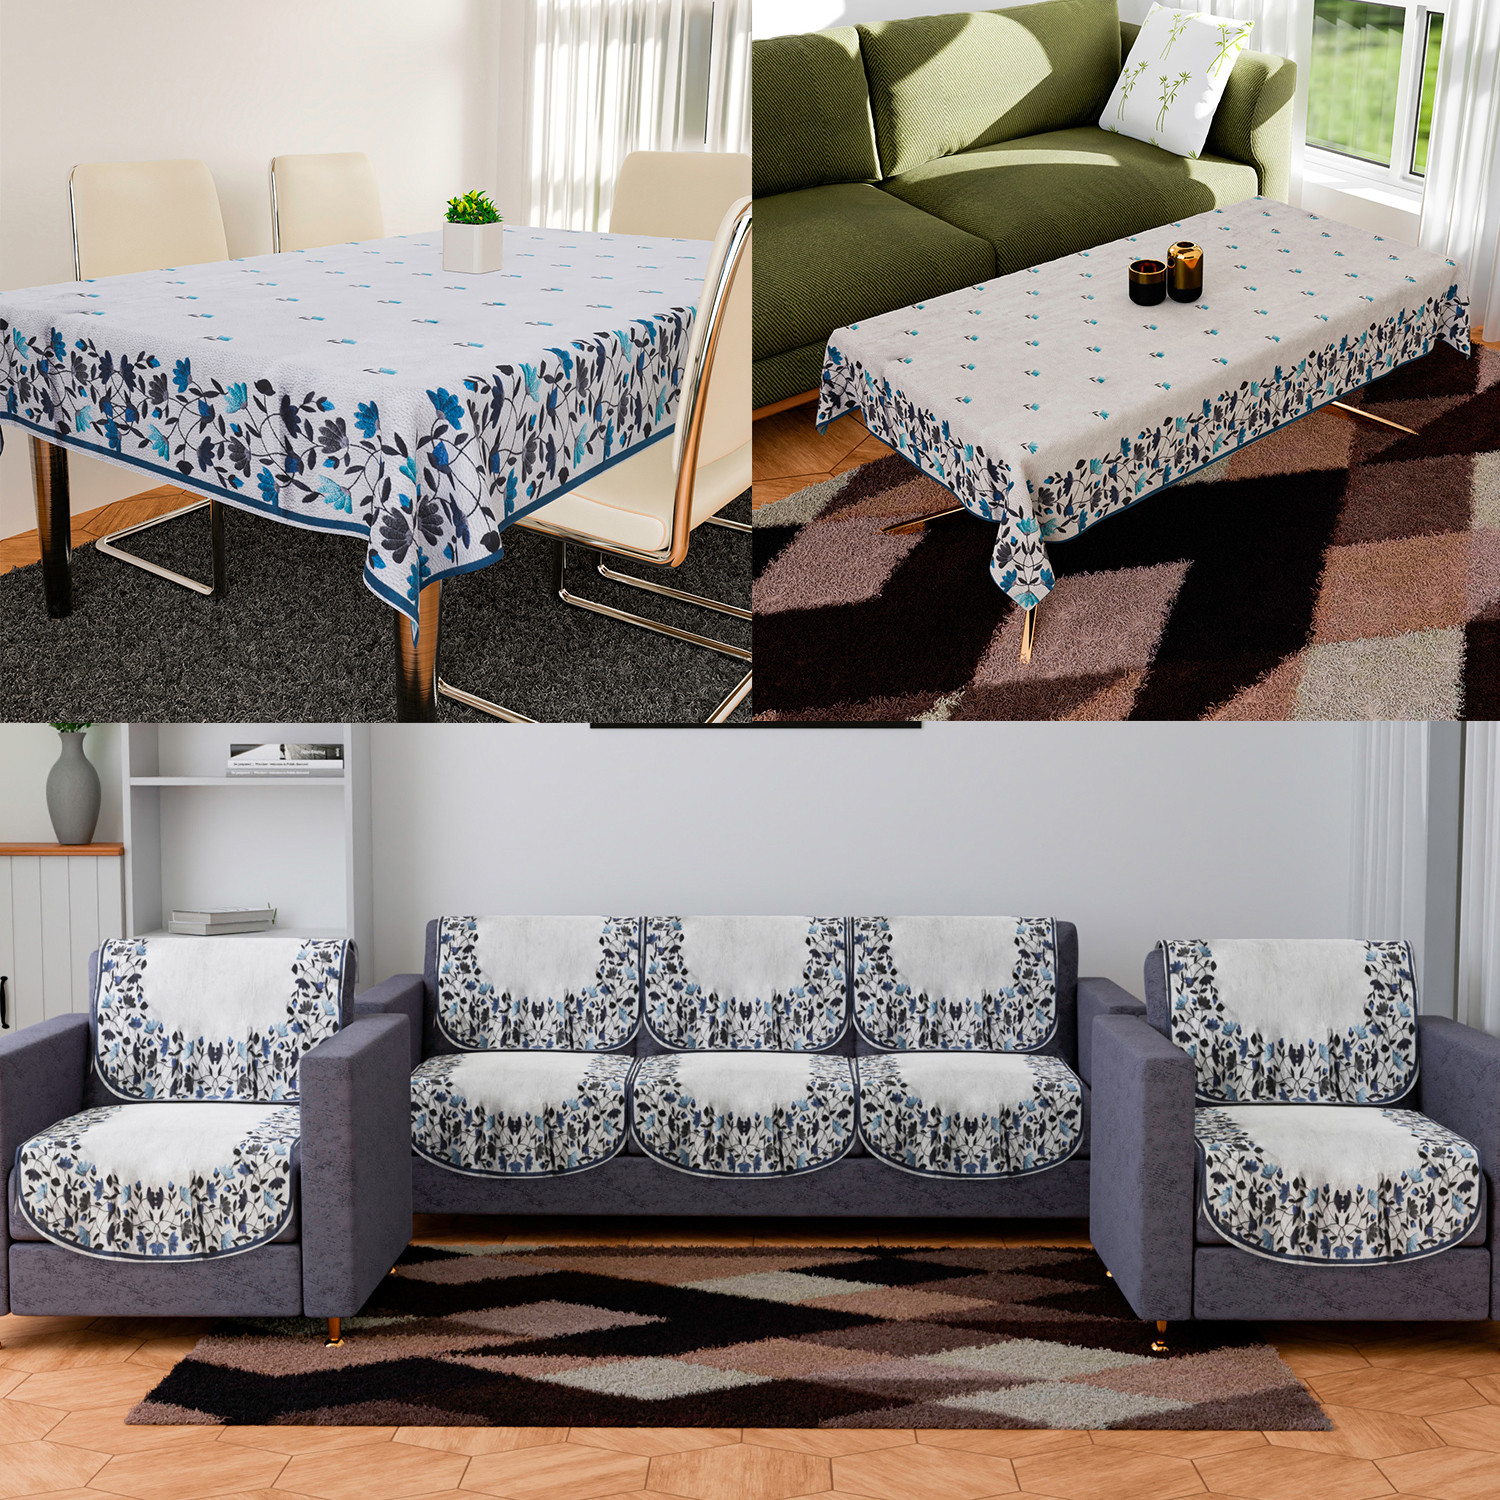 Kuber Industries Sofa-Center & Dining Table Cover Set | Blue Digital Leaf Sofa-Center & Dining Table Cover | 5 Seater Sofa with Center-Dining Table Cover Set | Gray